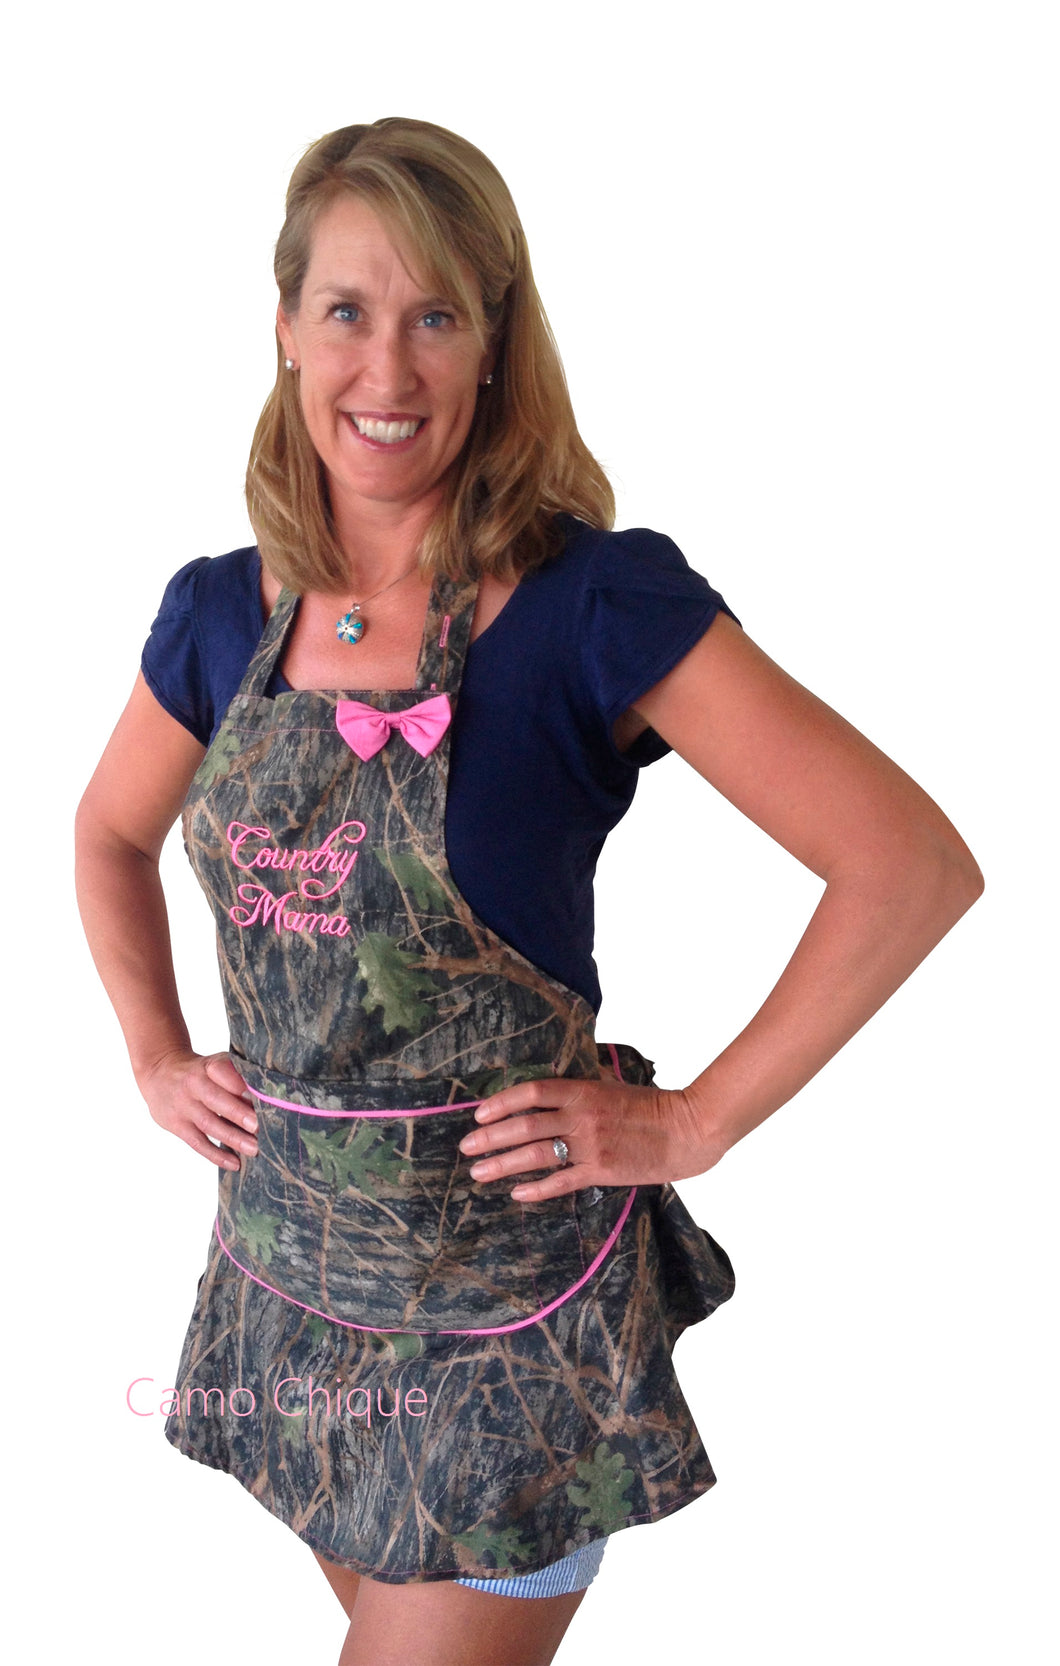 Pink Country Mama Camo Ruffle Hostess Twill Apron with Bow, OSFM S-XL - Camo Chique & Spa Boutique